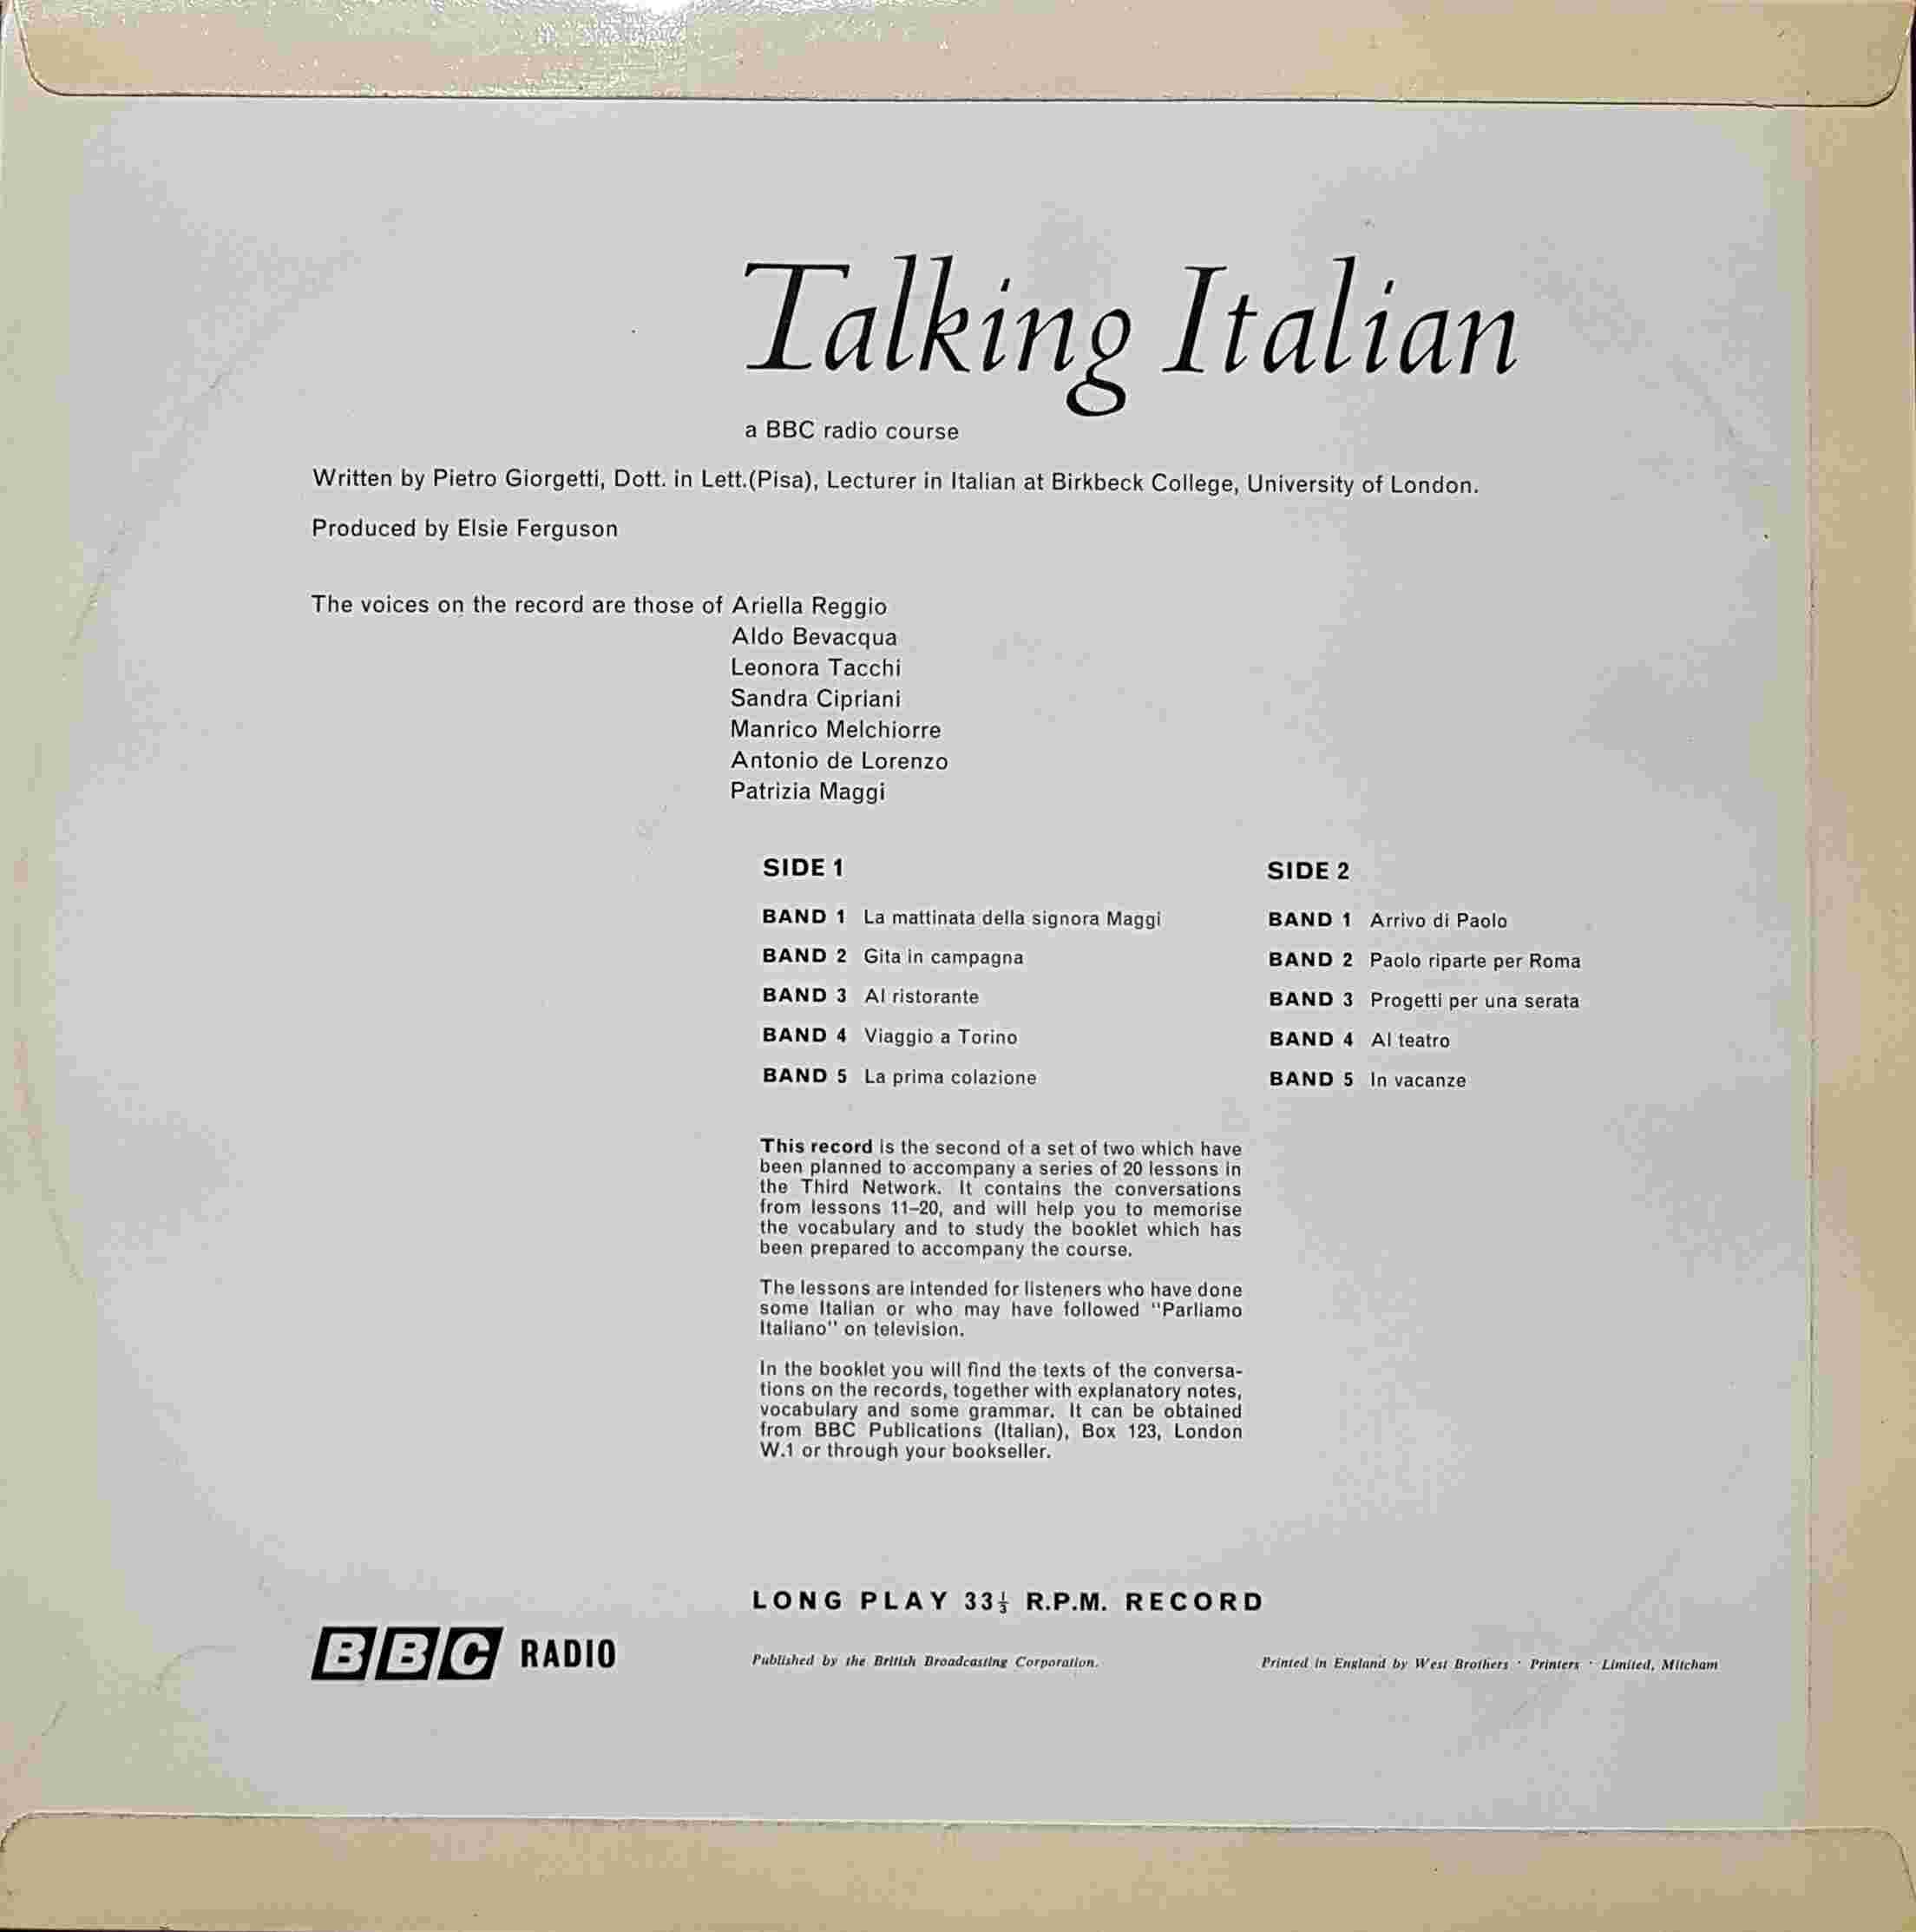 Picture of OP 33/34 Talking Italian - Lessons 11 - 20 by artist Pietro Giorgetti from the BBC records and Tapes library